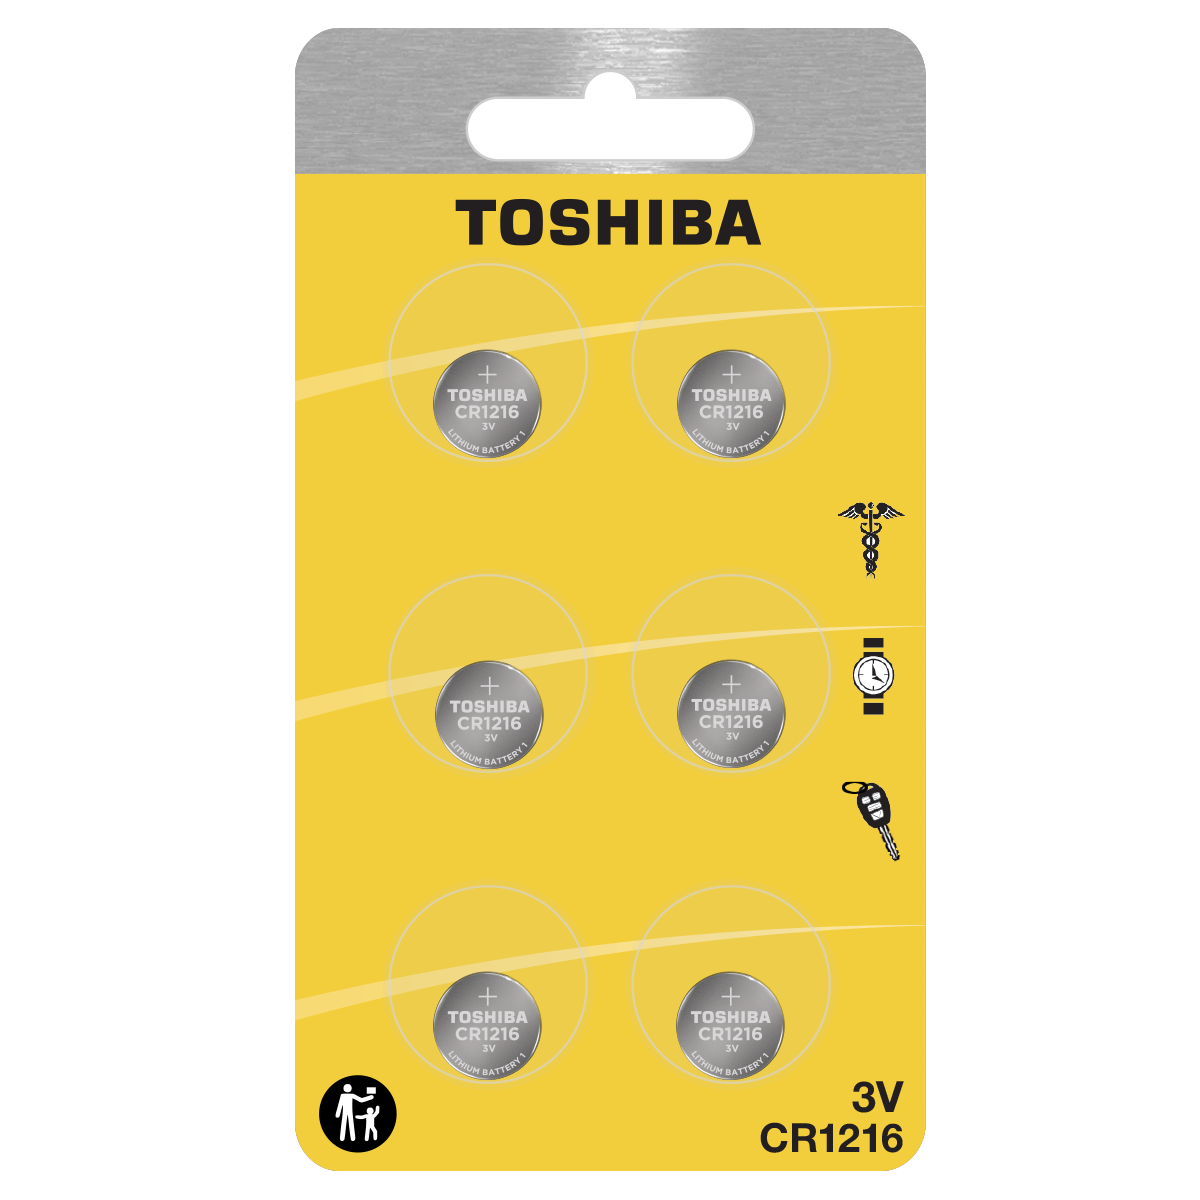 Toshiba CR1216 Battery 3V Lithium Coin Cell (6 PCS Child Resistant Blister Package)